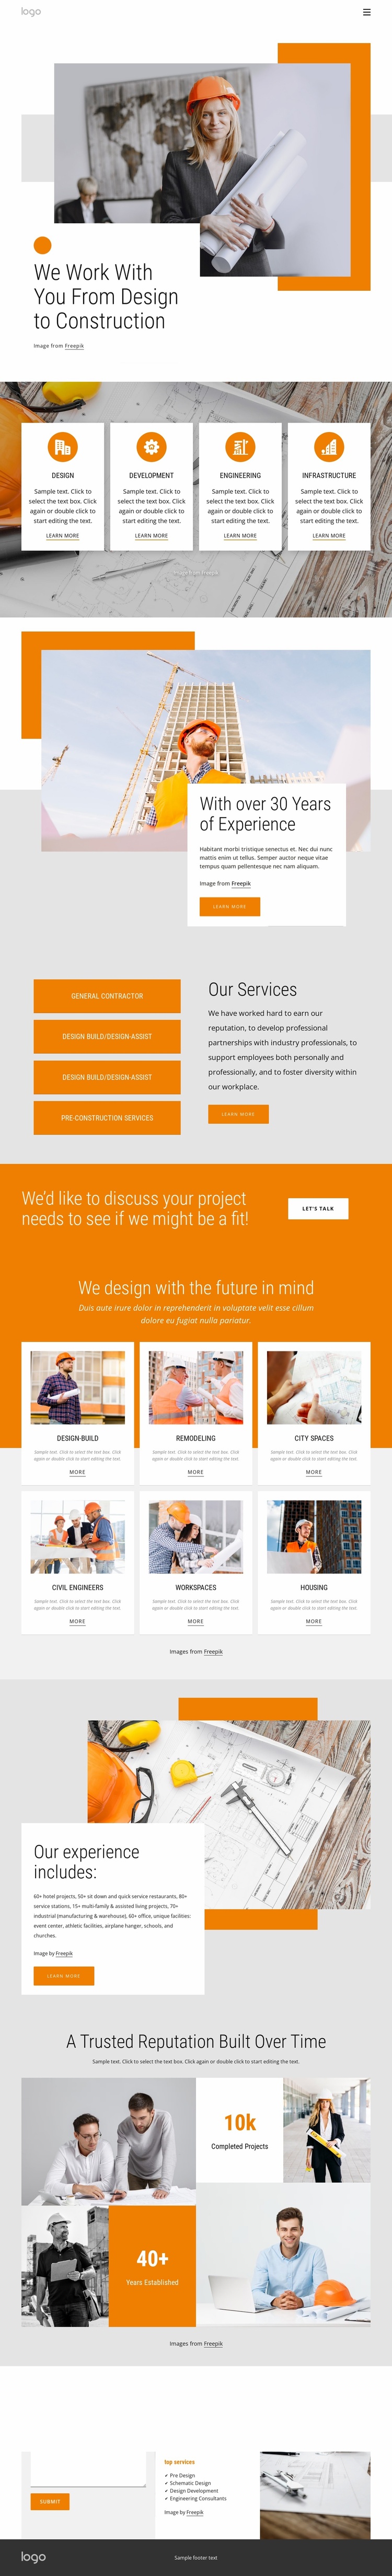 From design to construction eCommerce Template